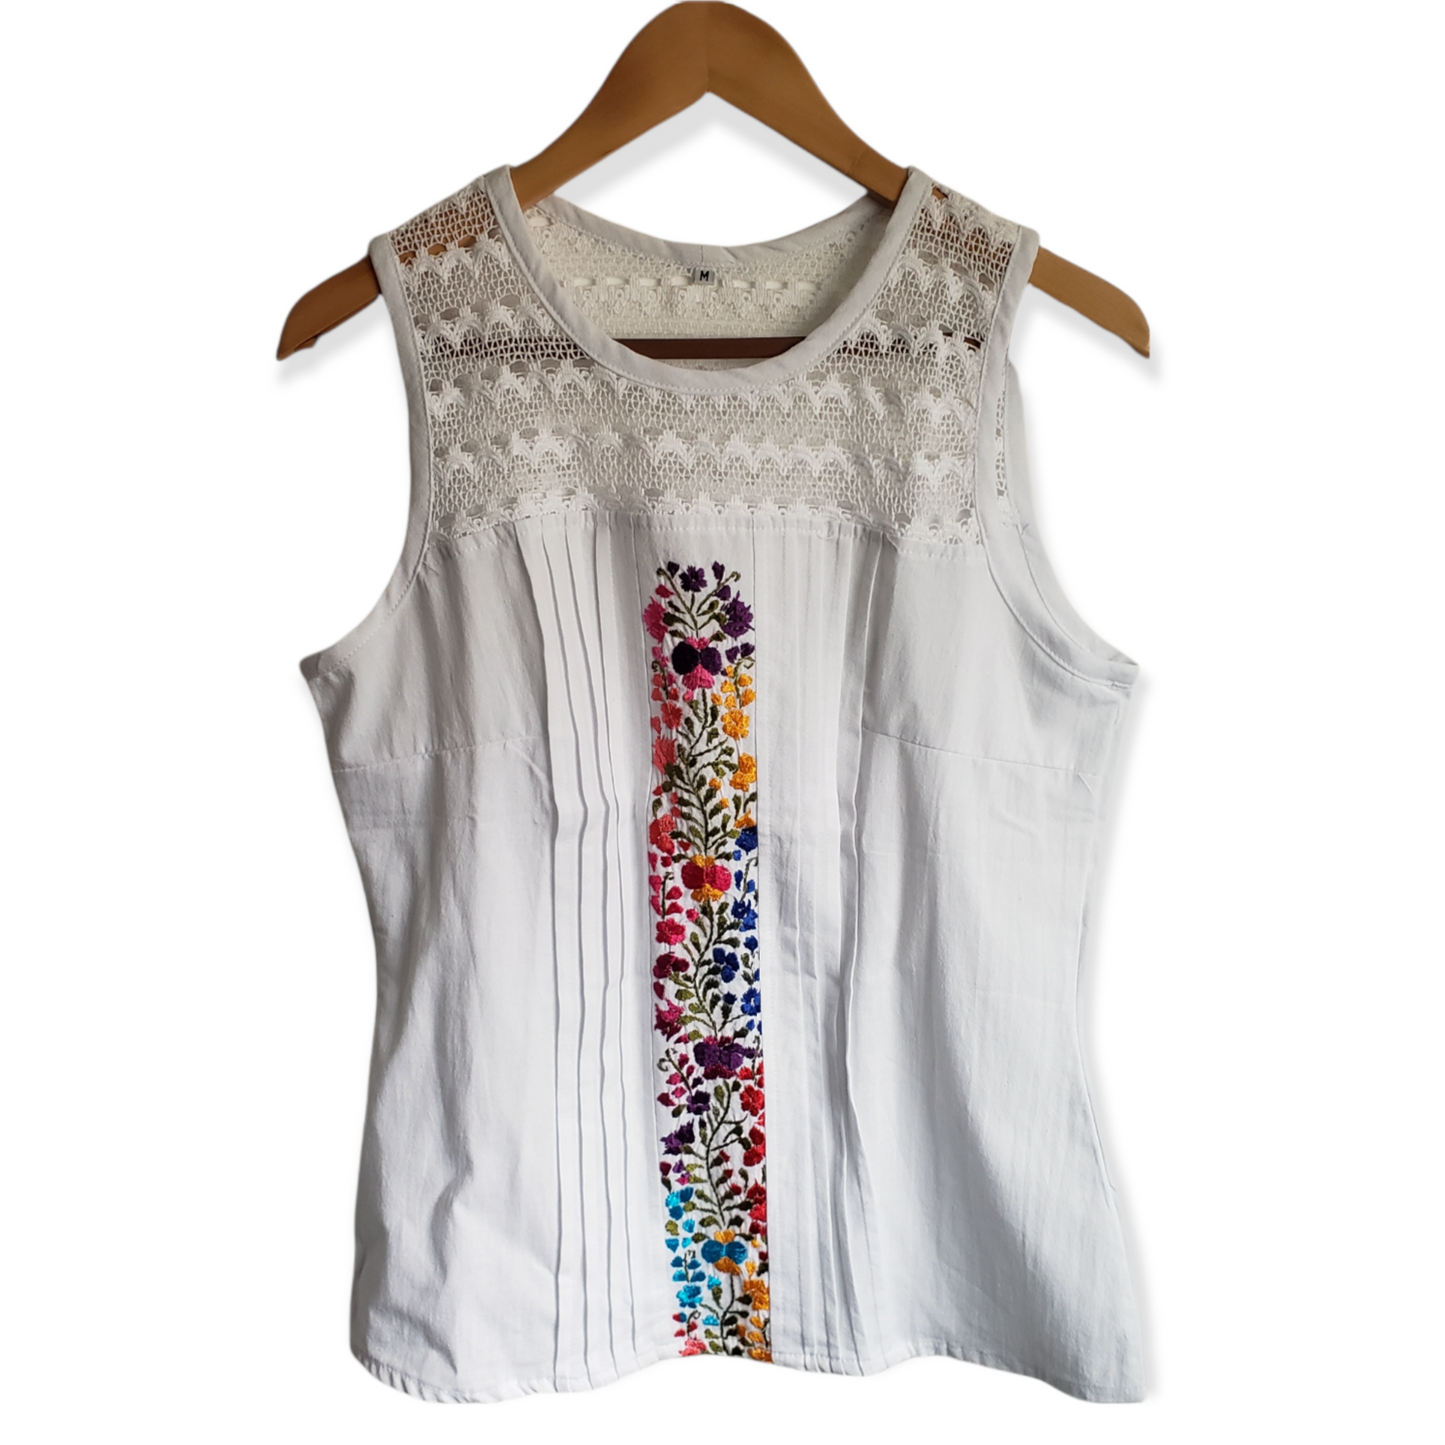 Traditional Mexican Embroidered Crochet Pleated Shirt Floral Top Handmade Oaxaca Floral